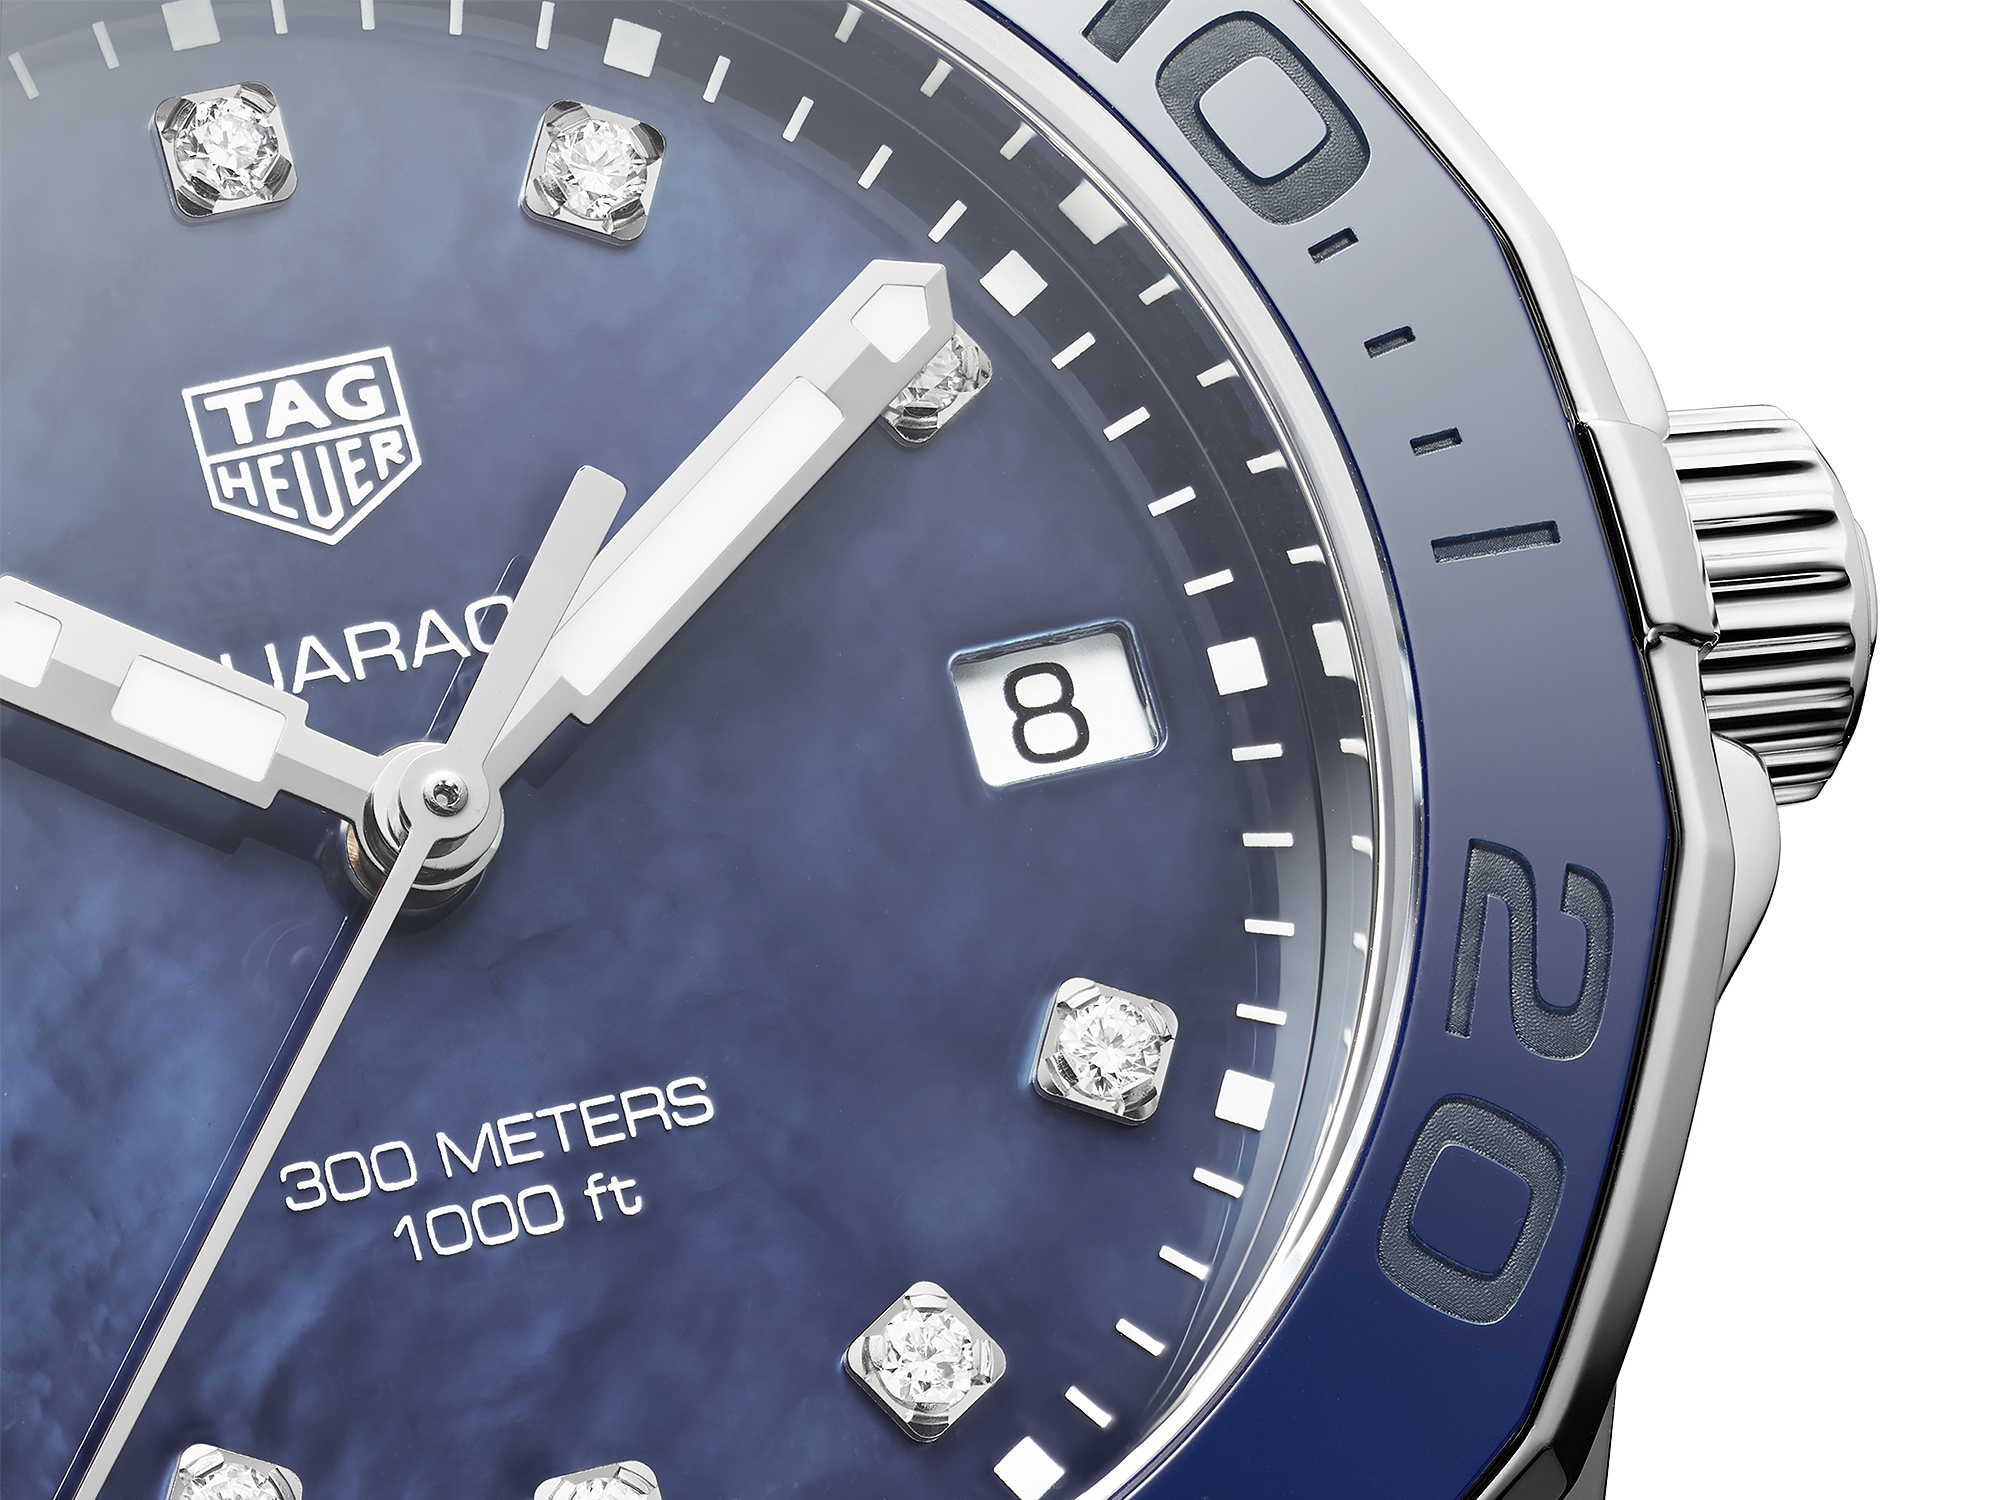 TAG Heuer Aquaracer WAY131K 35mm Stainless Steel Ladies WatchTAG Heuer Aquaracer WAY131K. BA0748